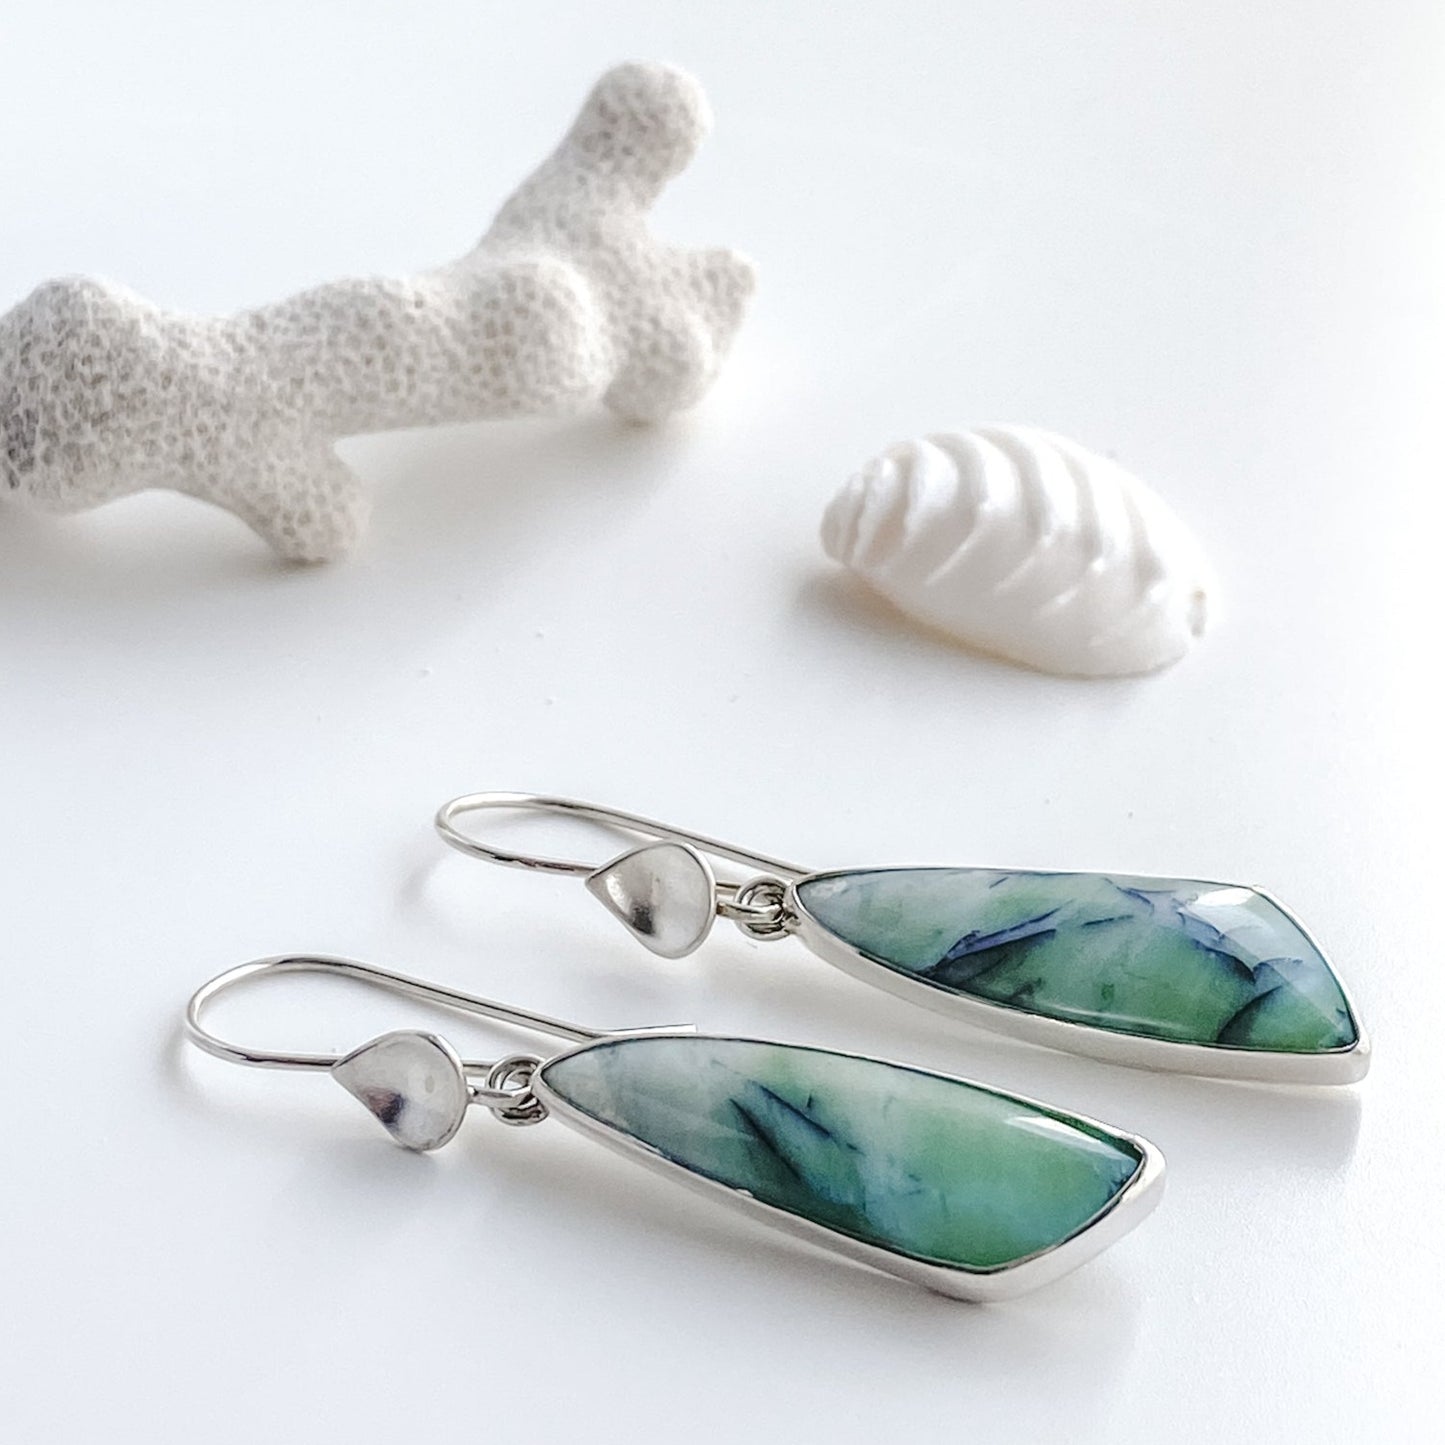 Opalized wood and silver water drop earrings are displayed laying down on a white background with white coral and a white seashell.